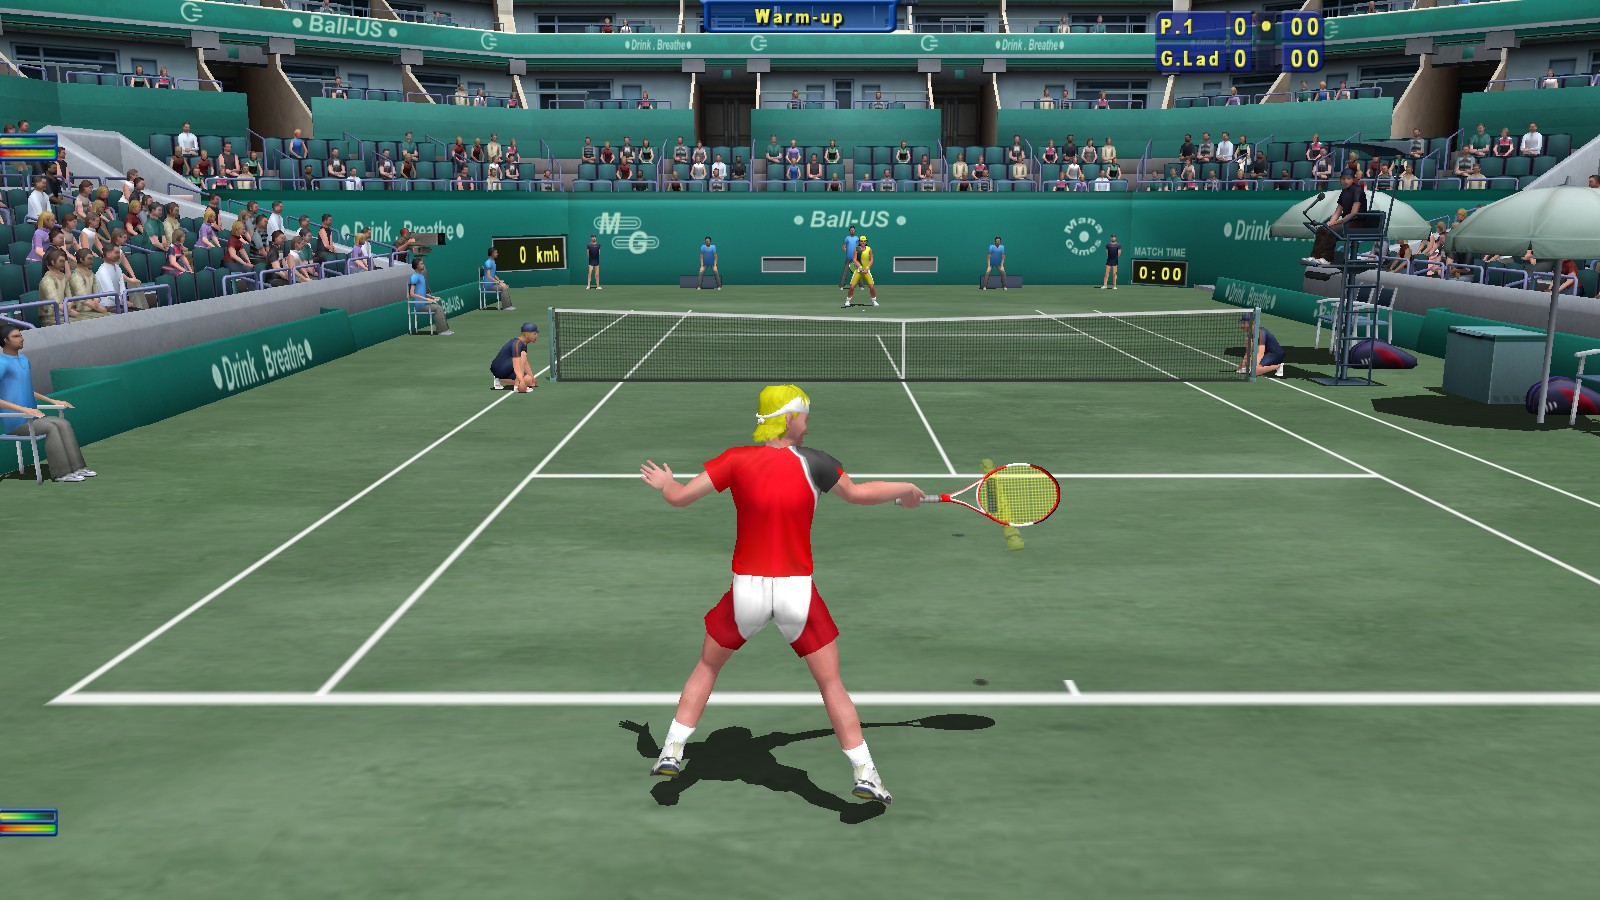 Save 34% on Tennis Elbow 2013 on Steam